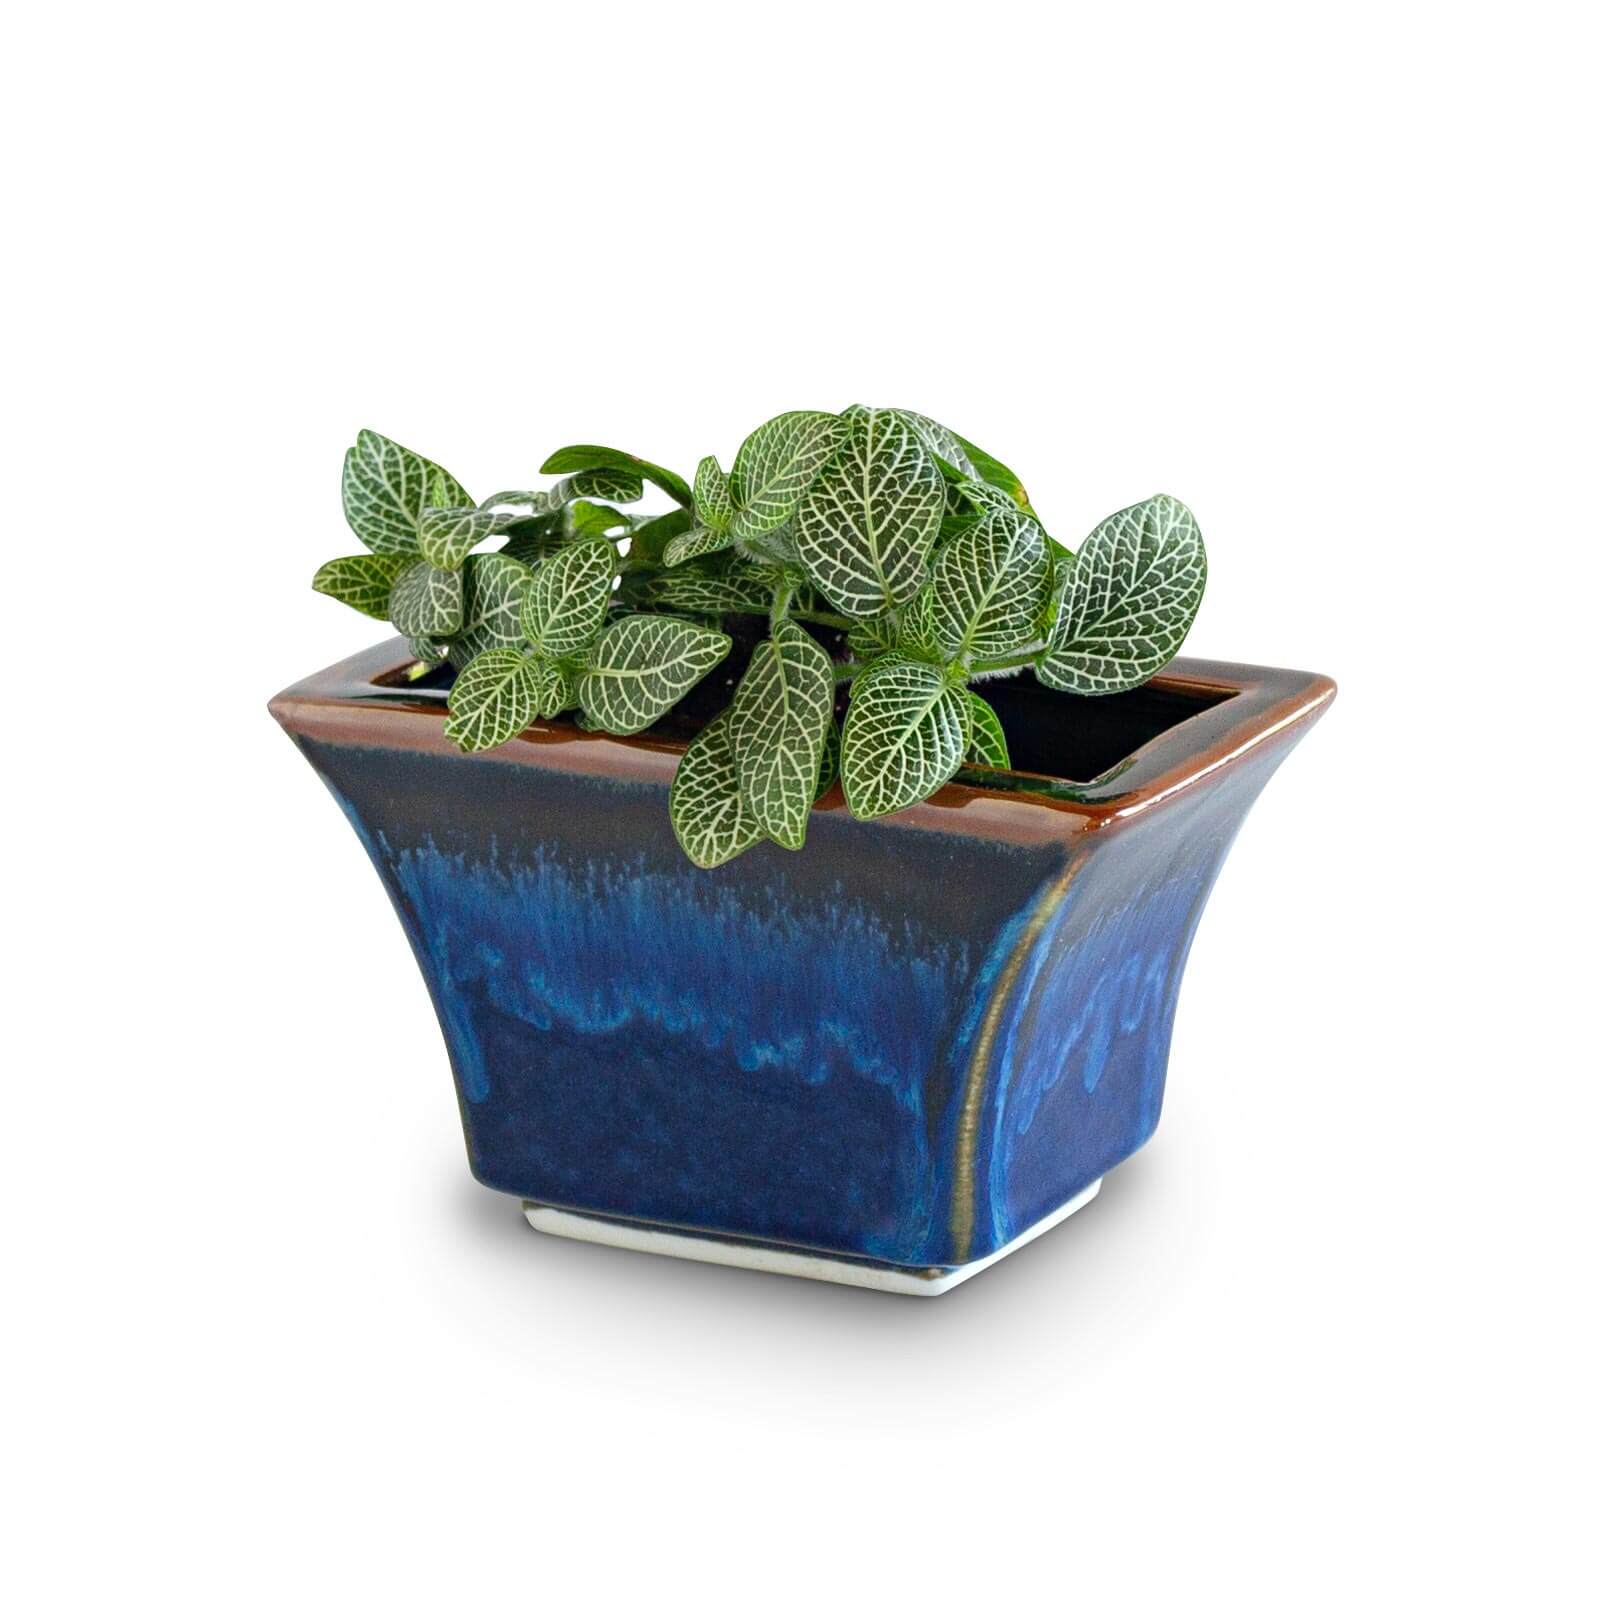 Handmade Pottery Windowsill Planter in Blue Hamada pattern made by Georgetown Pottery in Maine